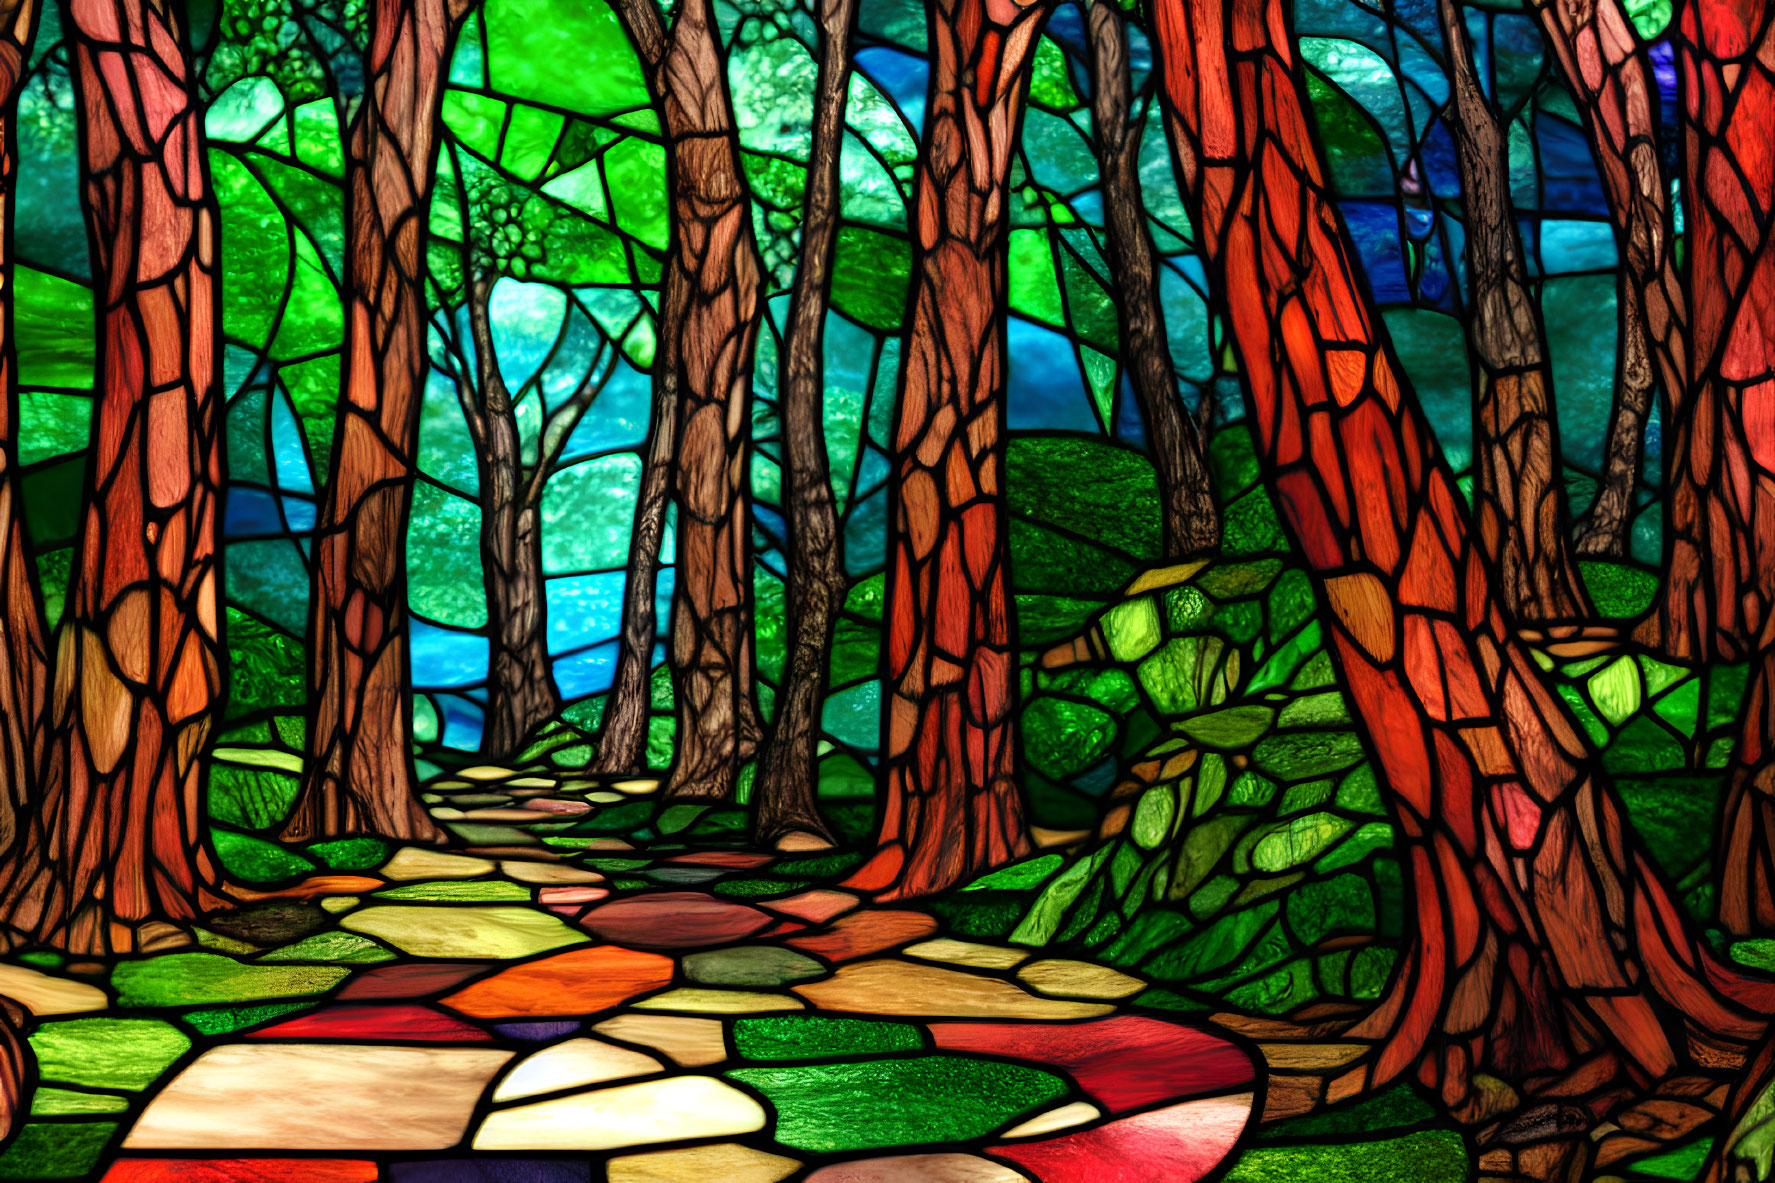 Vibrant forest scene in stylized stained glass design